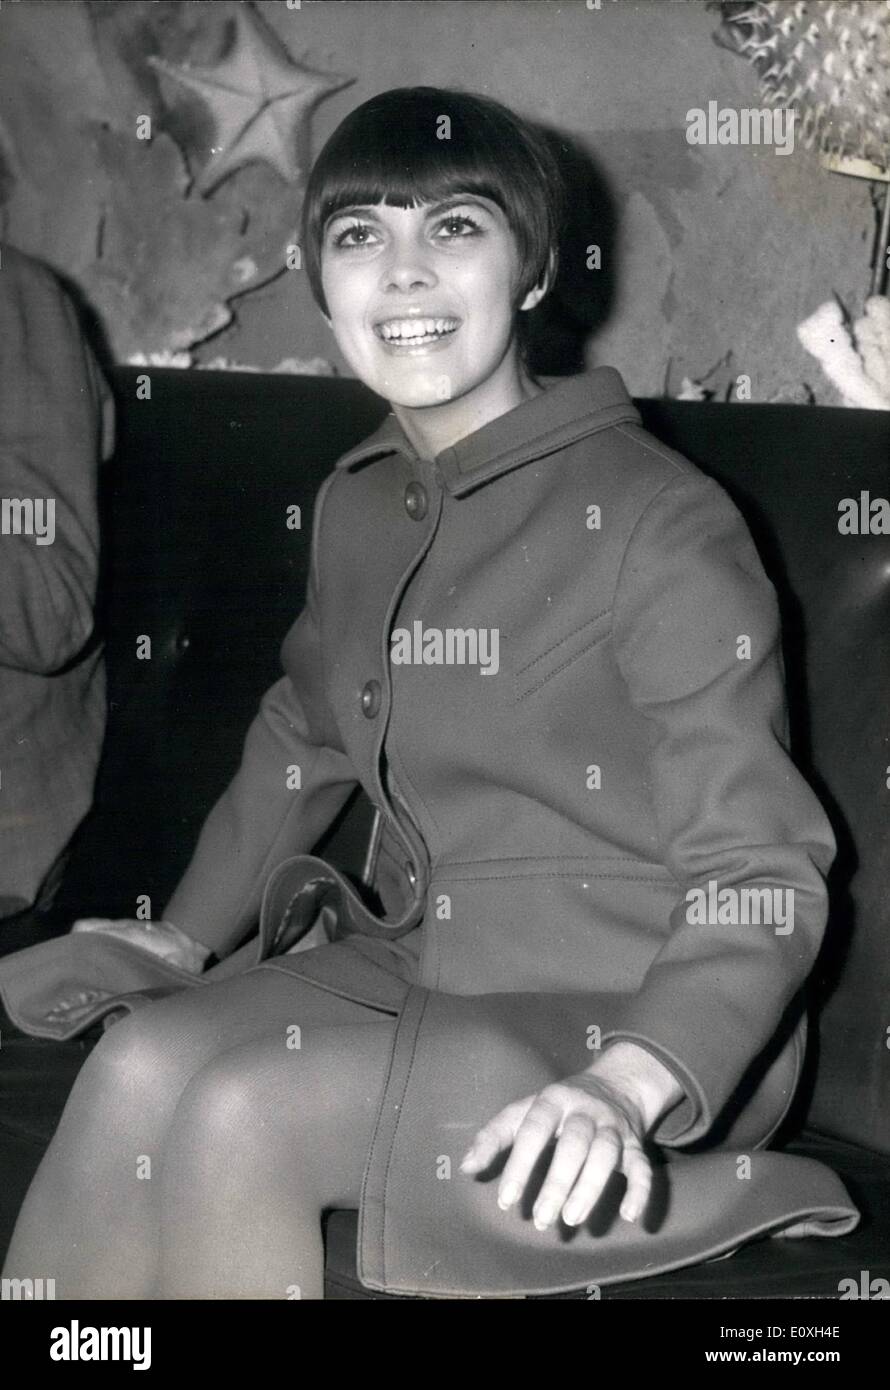 Oct. 10, 1966 - MIREILLE MATHIEU: BACK FROM USA - TEENAGE SINGER MIREILLE MATHIEU PROCLAIMED THE NEW EDITH PIAF HER VOICE AND M Stock Photo